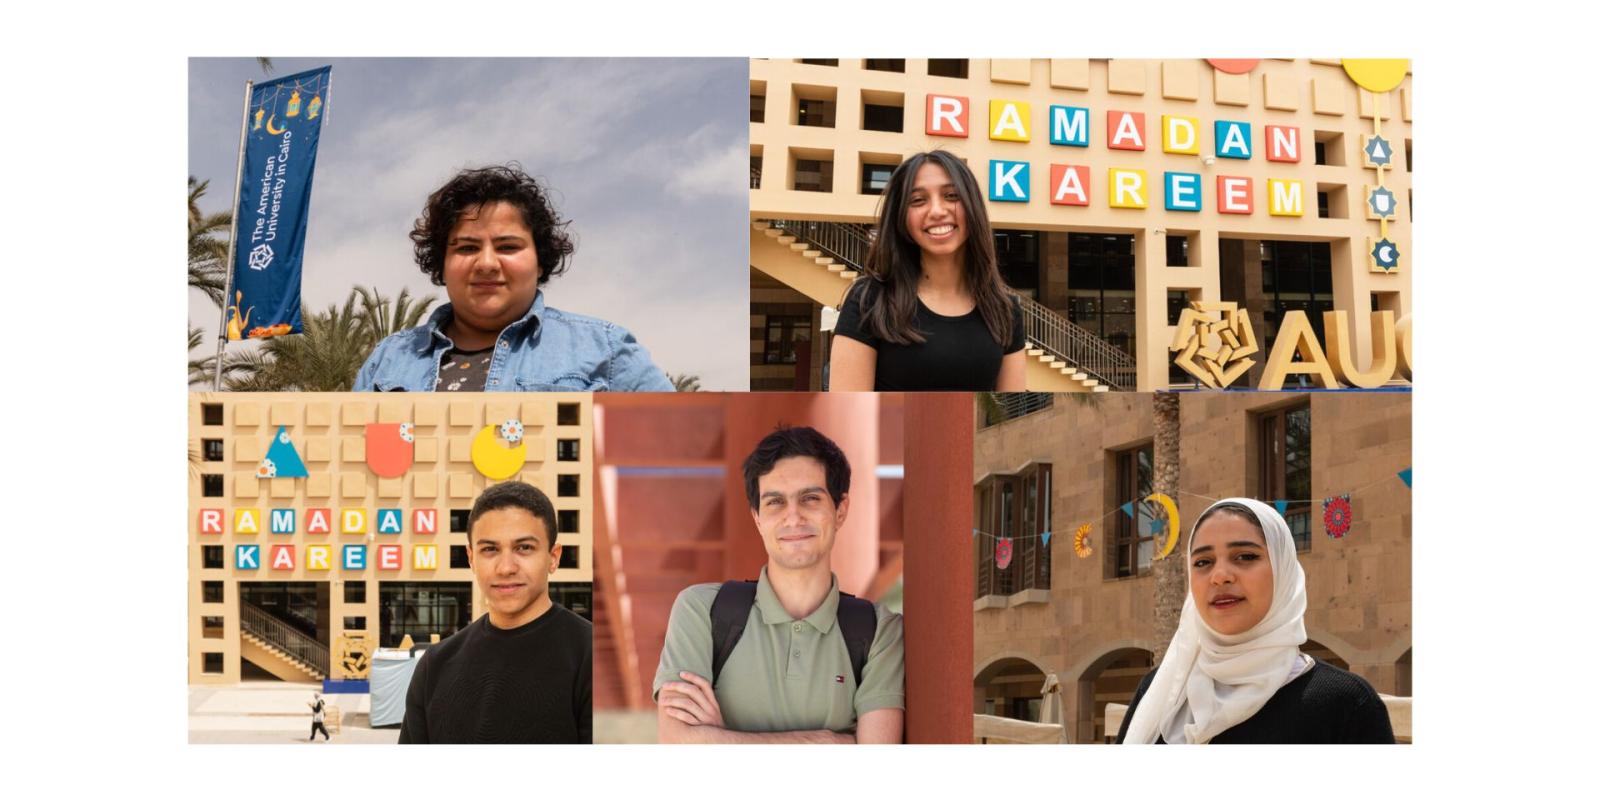 A collage of four students standing next to their Ramadan designs on campus. In the top right, a female student stands next to her banner design, on the top left, a girl smiles in front of the library facade with her AUC and Ramadan Kareem signs on the front. On the bottom left, a male student stands next to his library with his AUC design with the "C" as a crescent. On the bottom right, a female student stands next to her geometric designs strung between the trees. In the center bottom a male student.